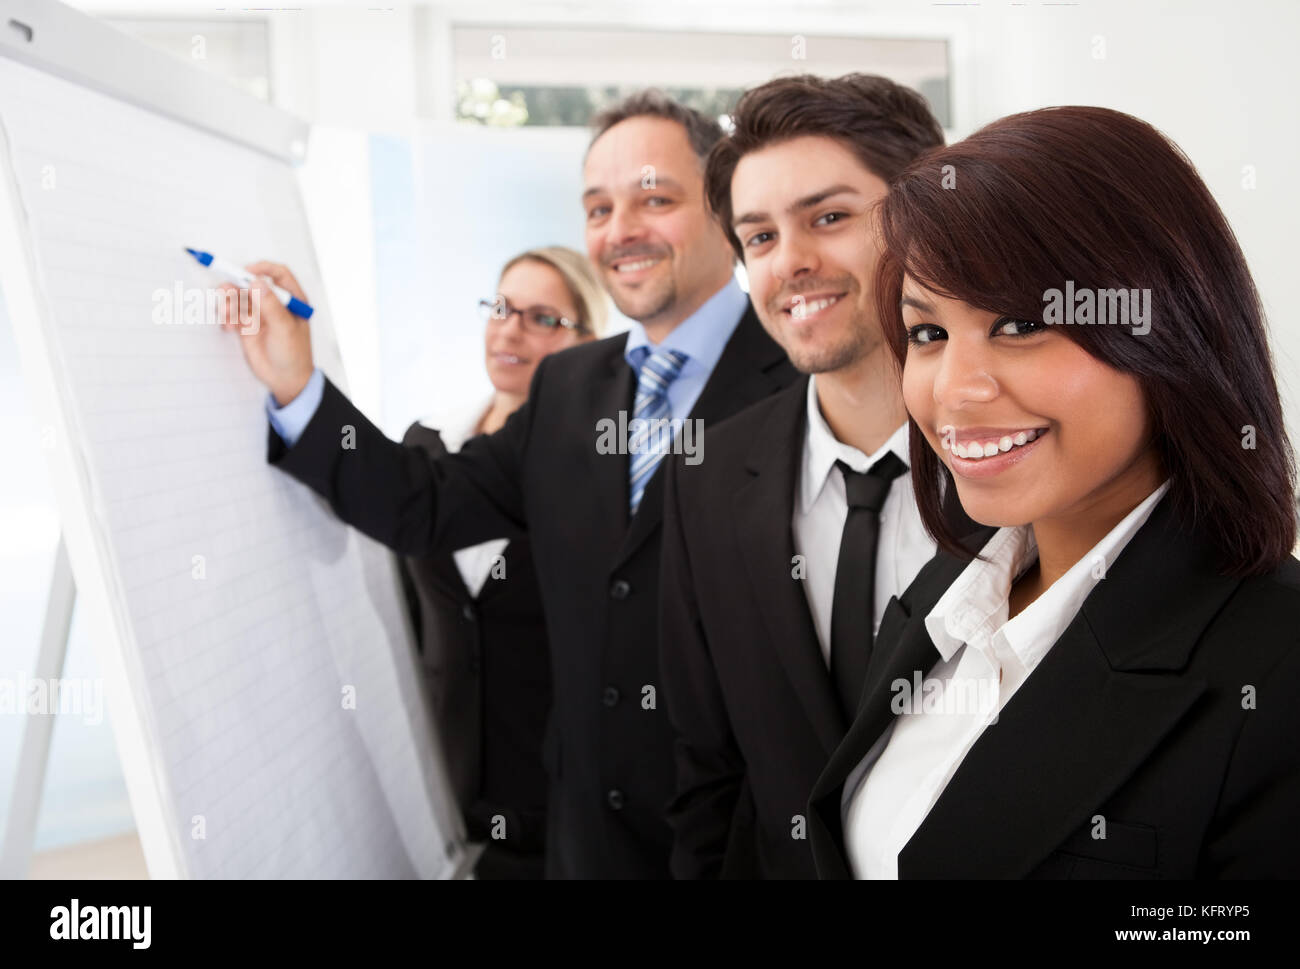 Group of business people looking at the graph on flipchart Stock Photo